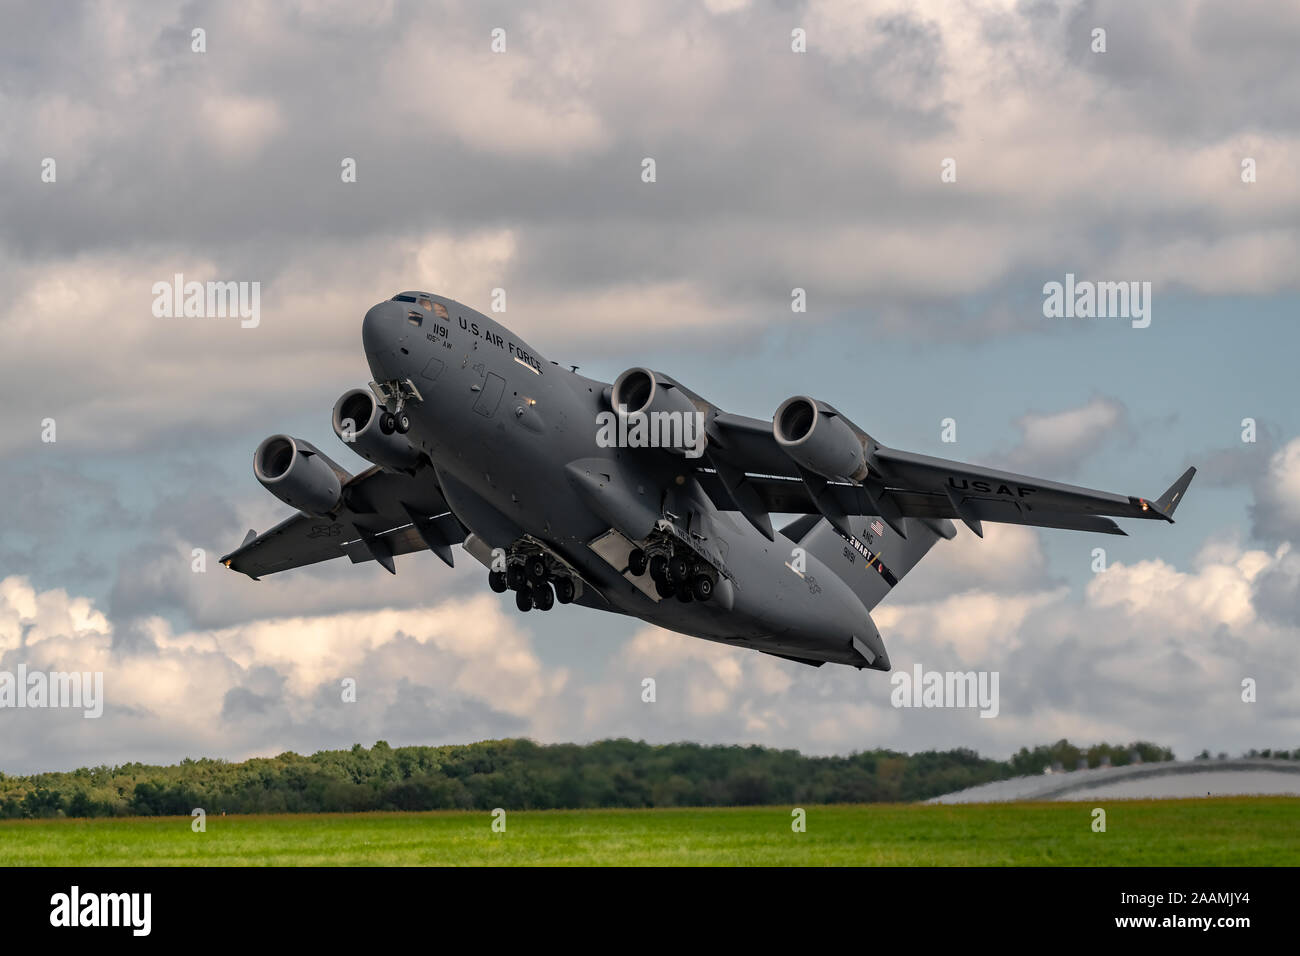 NEW WINDSOR, NY - SEPTEMBER 15, 2018: Giant C-17 Globemaster III taking off at Stewart International Airport during the New York Airshow. Stock Photo